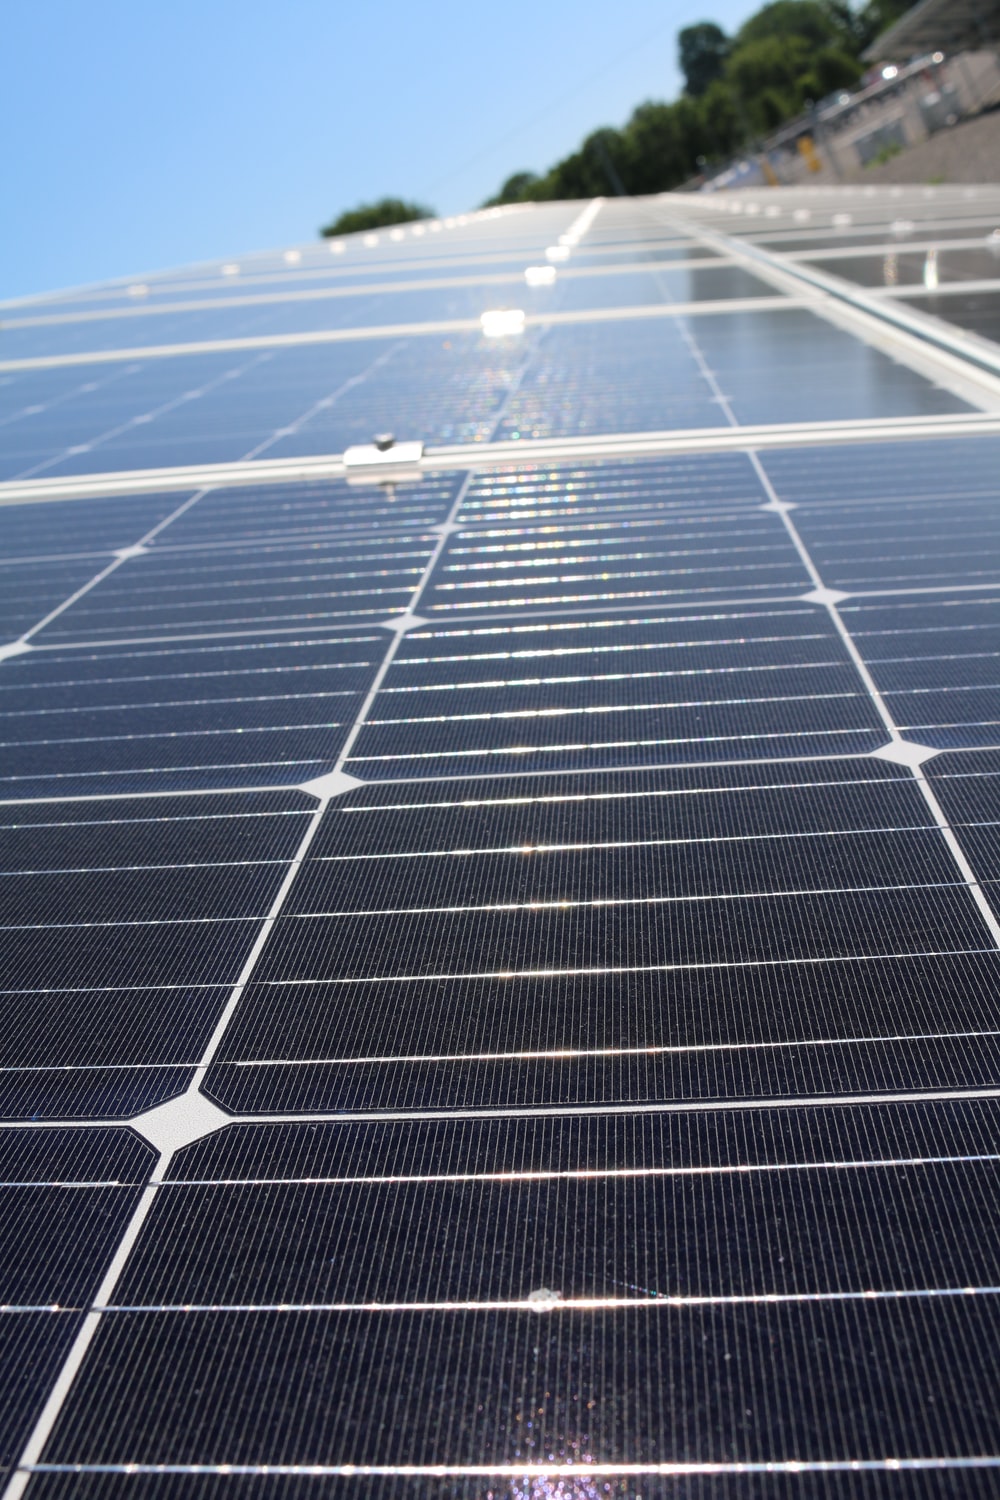 Solar Panel Picture. Download Free Image